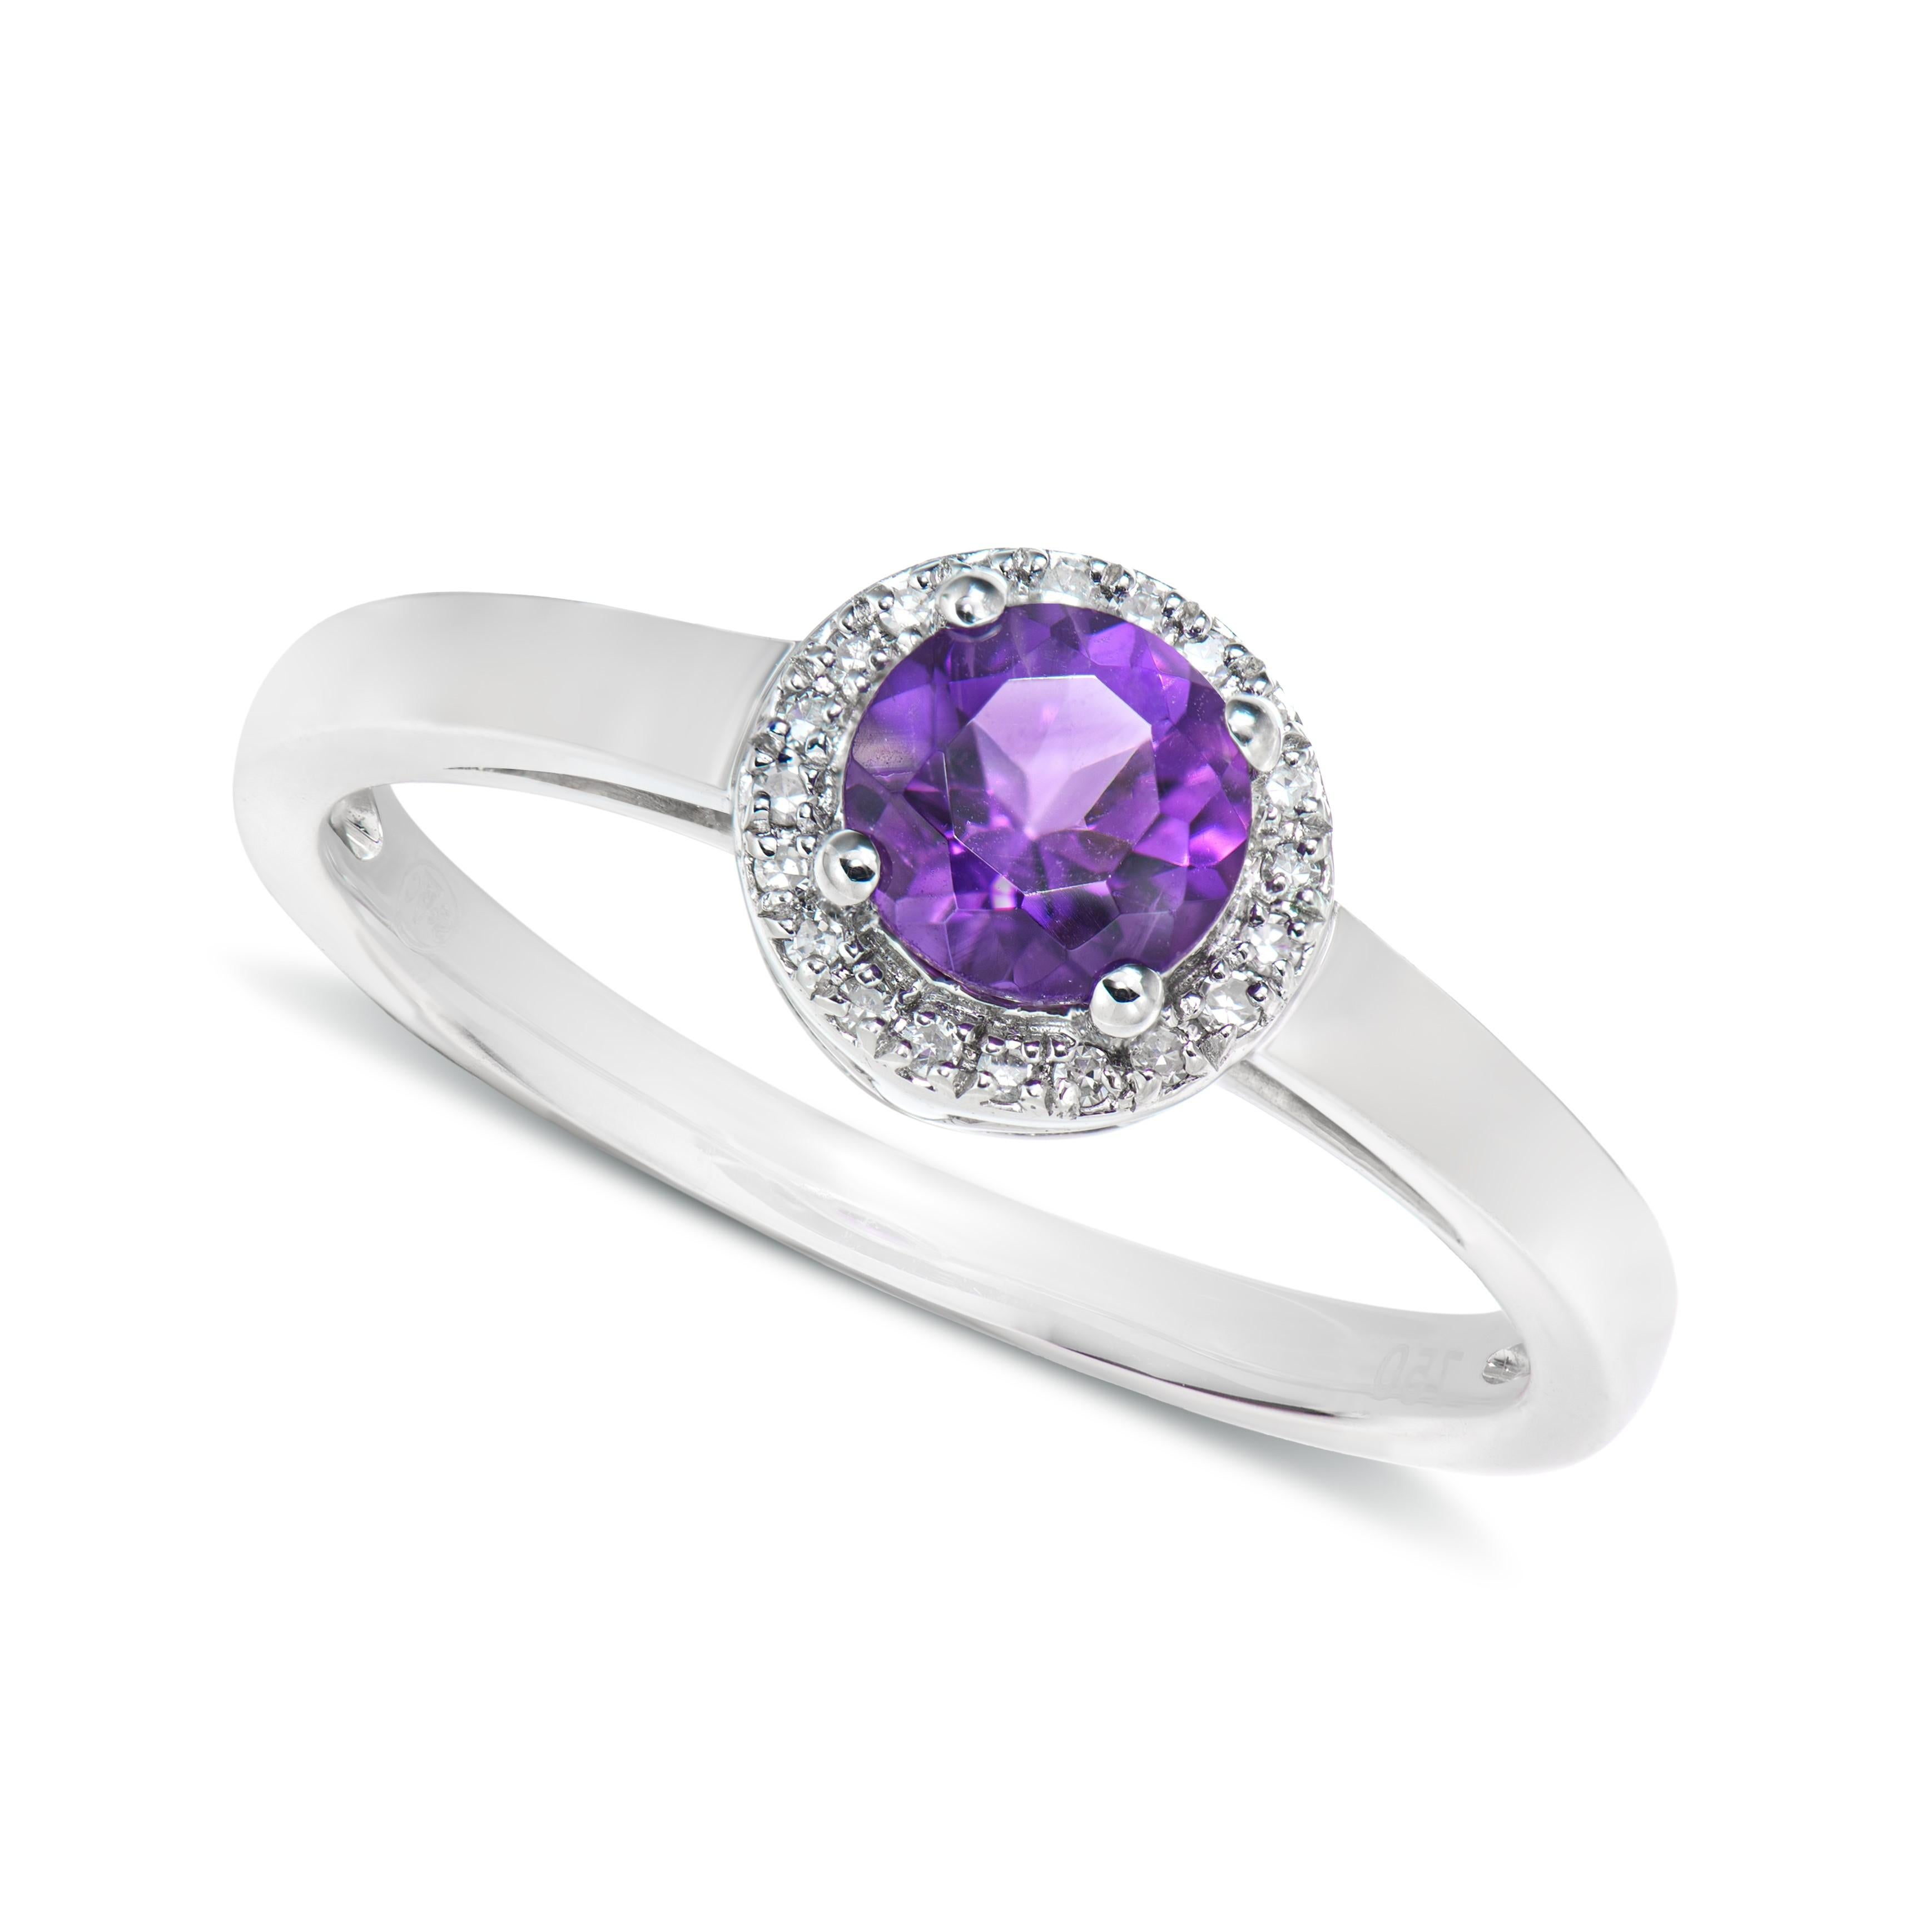 Contemporary 0.40 Carat Amethyst Fancy Ring in 18Karat White Gold with White Diamond.   For Sale